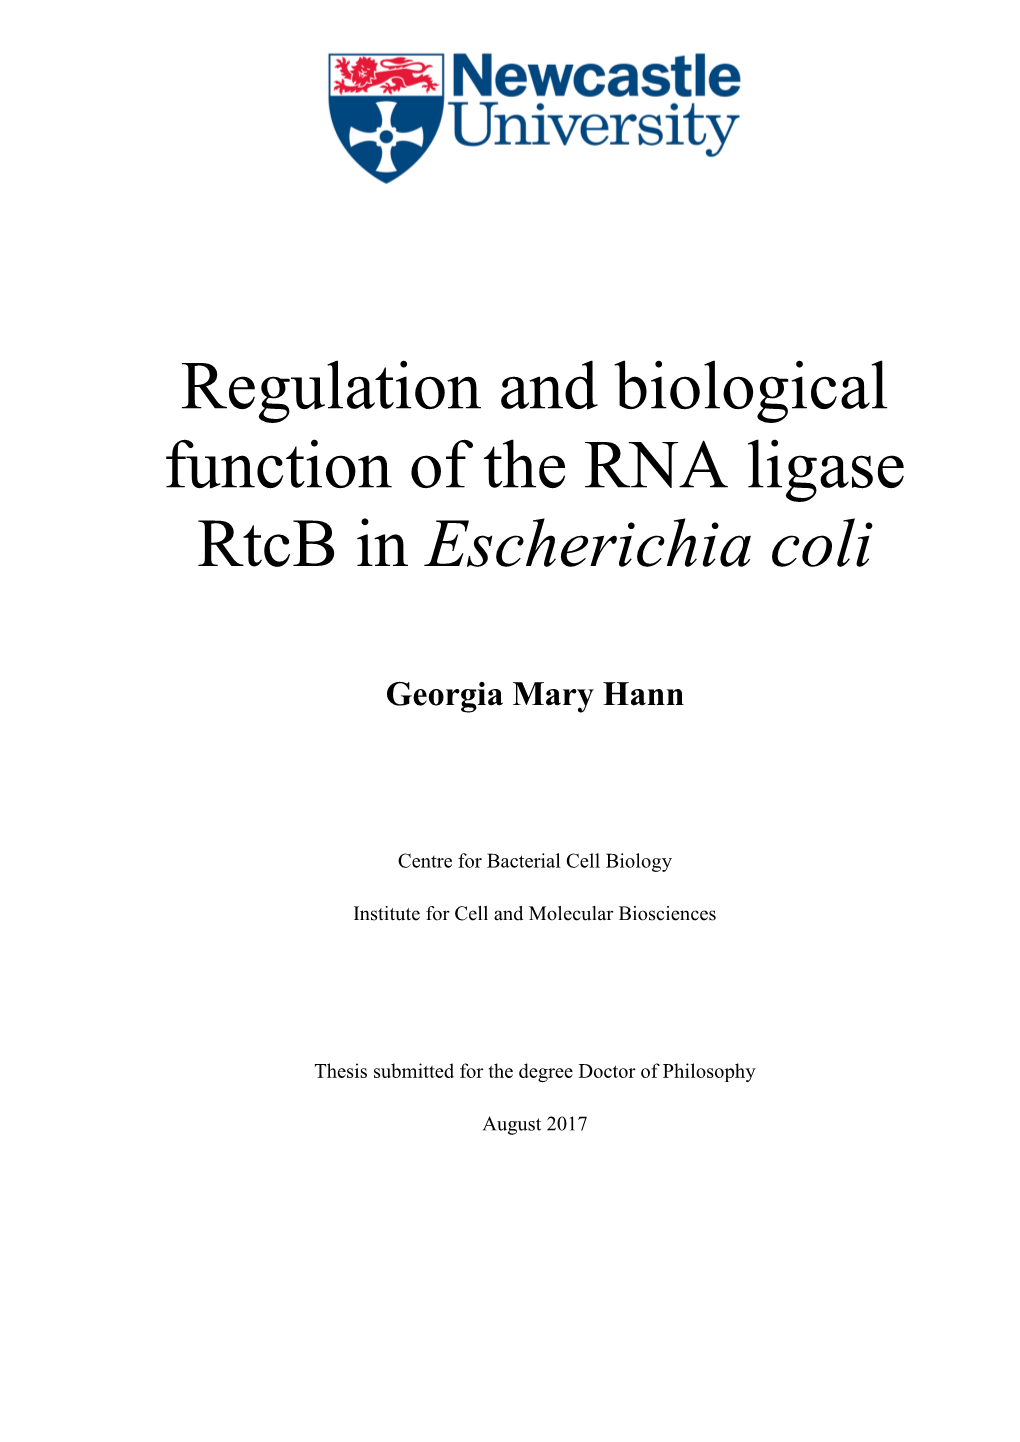 Transcriptional Regulation and Biological Function of the RNA